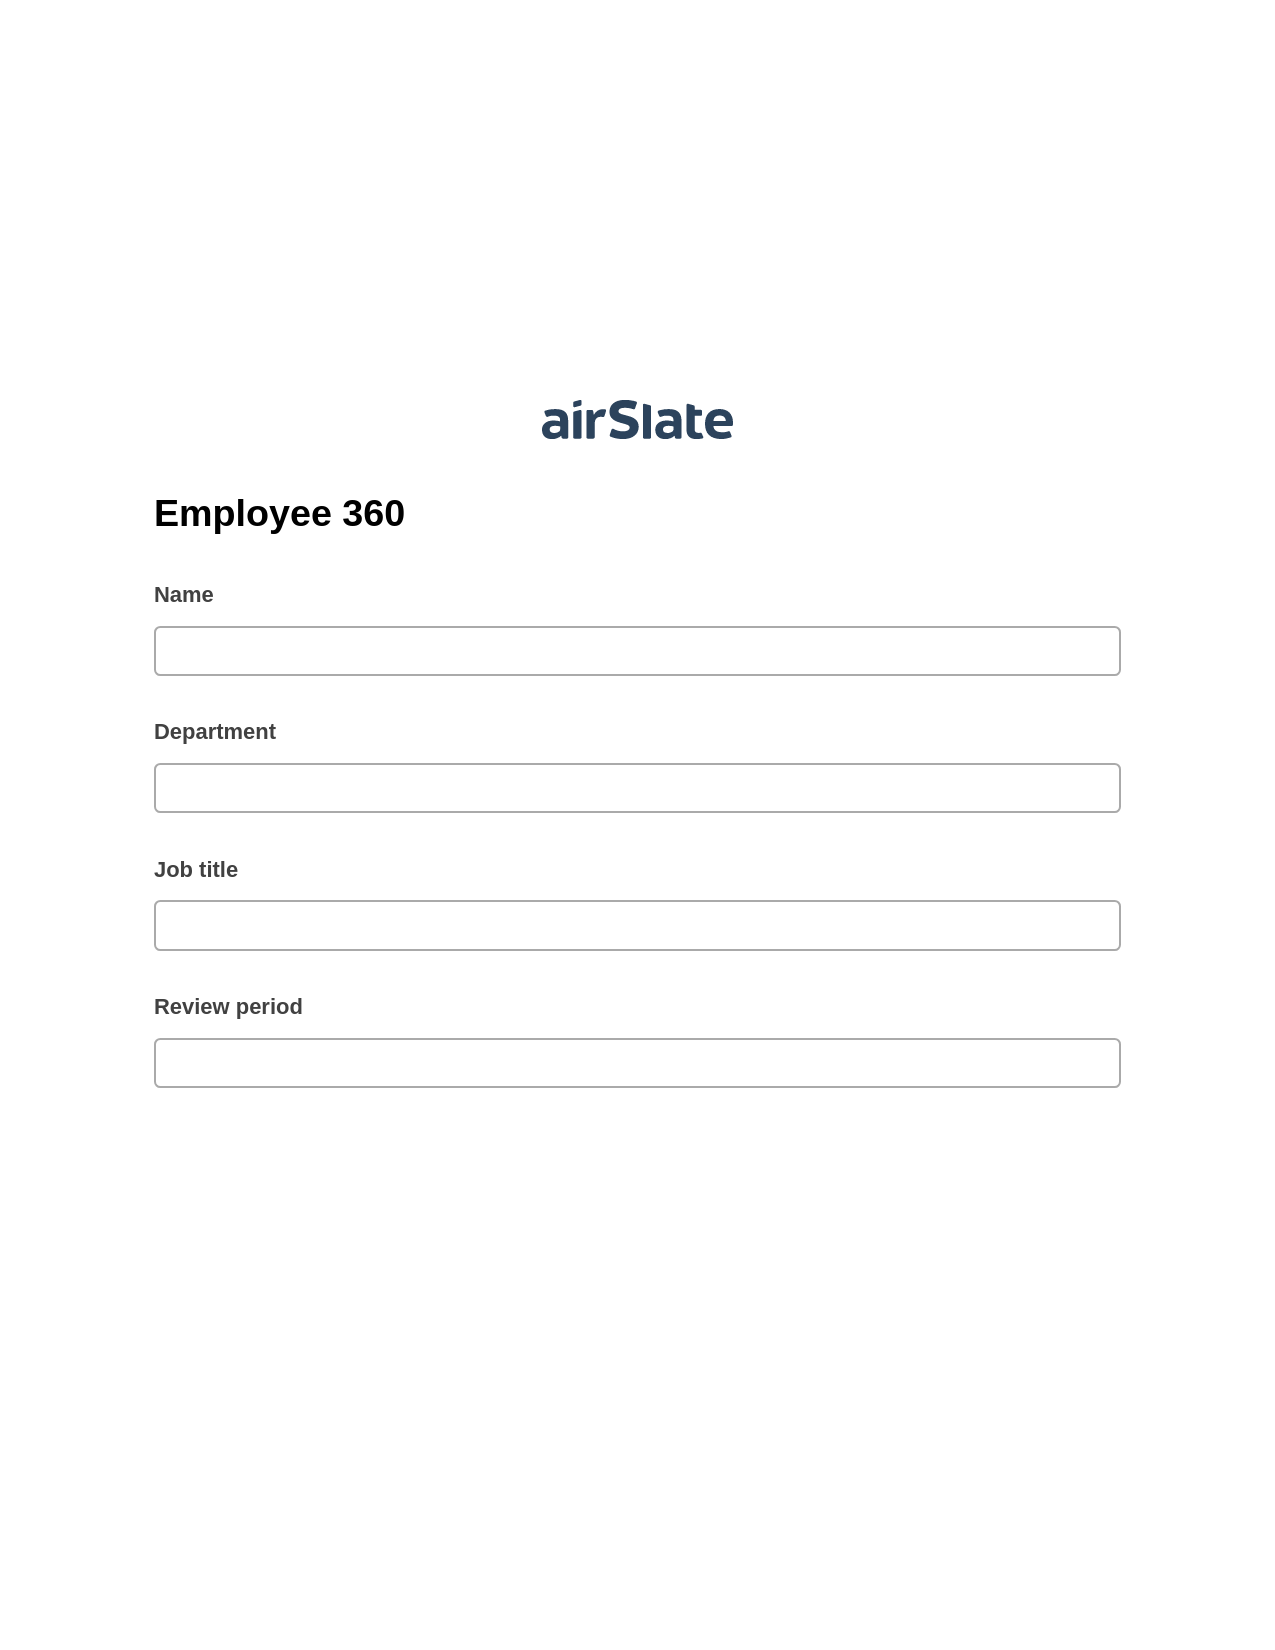 Employee 360 Pre-fill from MySQL Bot, Export to MS Dynamics 365 Bot, Export to Smartsheet